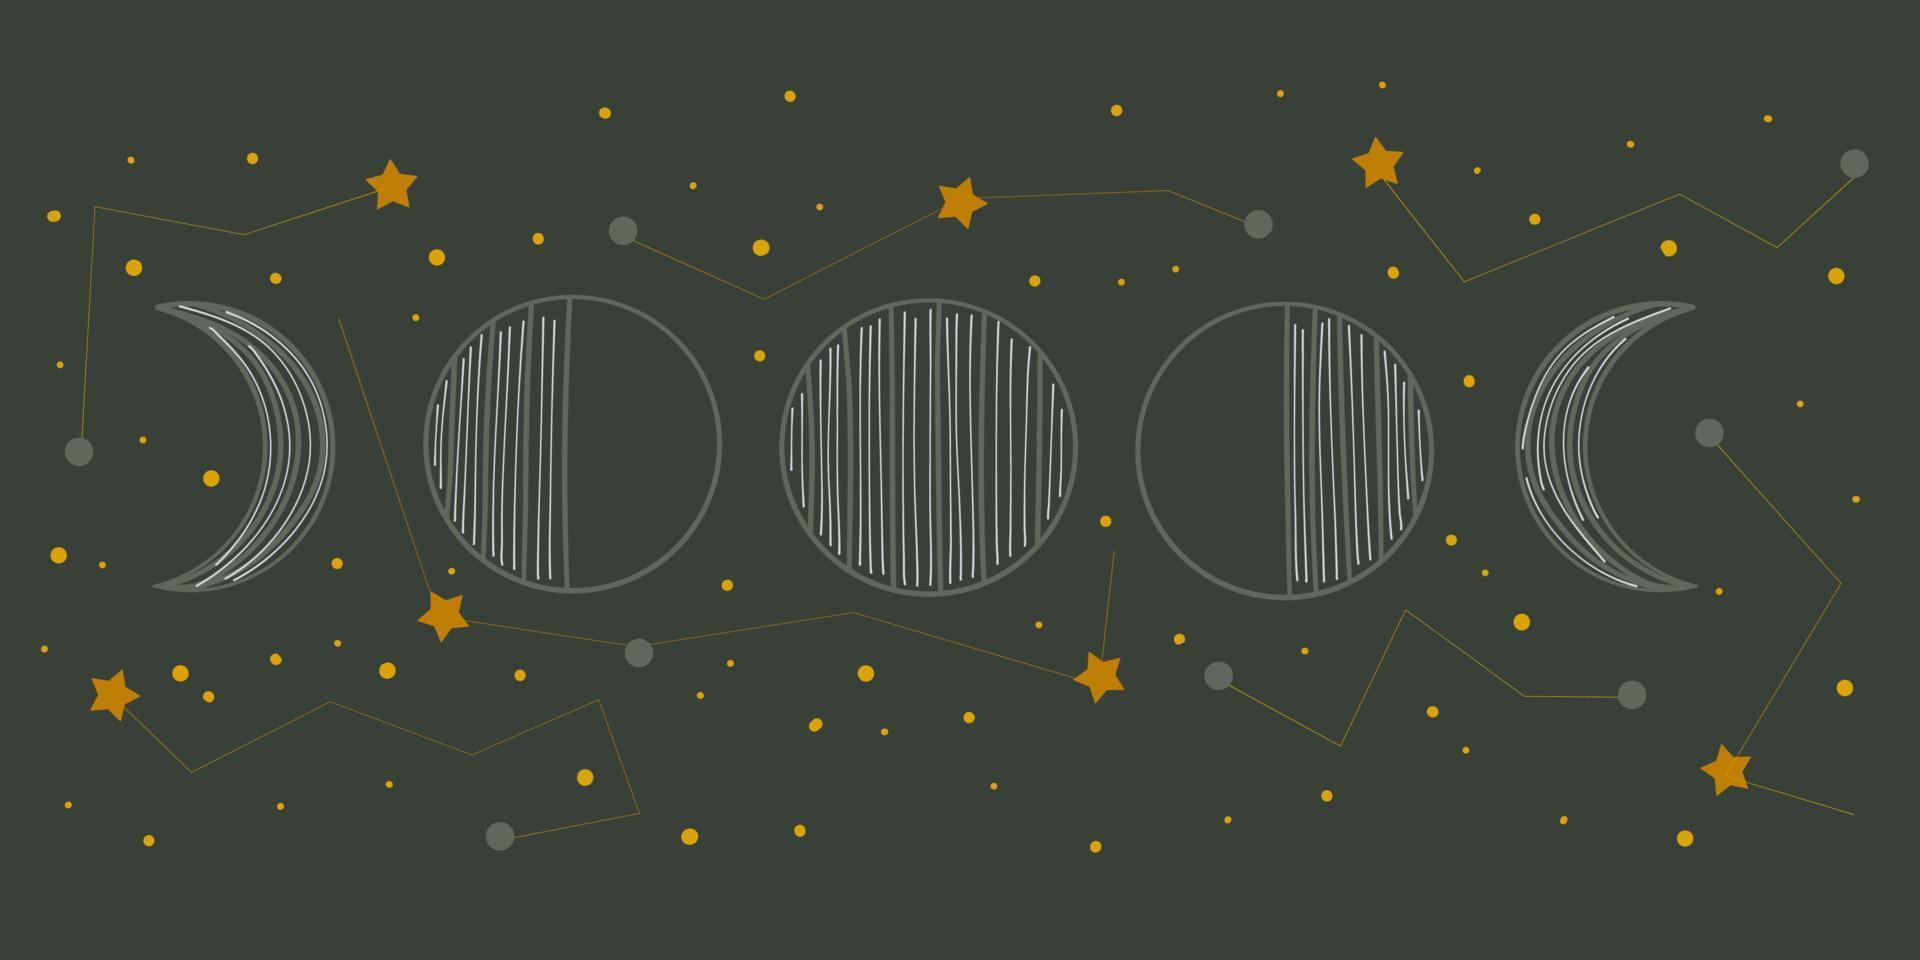 A graphic of the moon going through its phases, with stars around it - Moon phases, spiritual